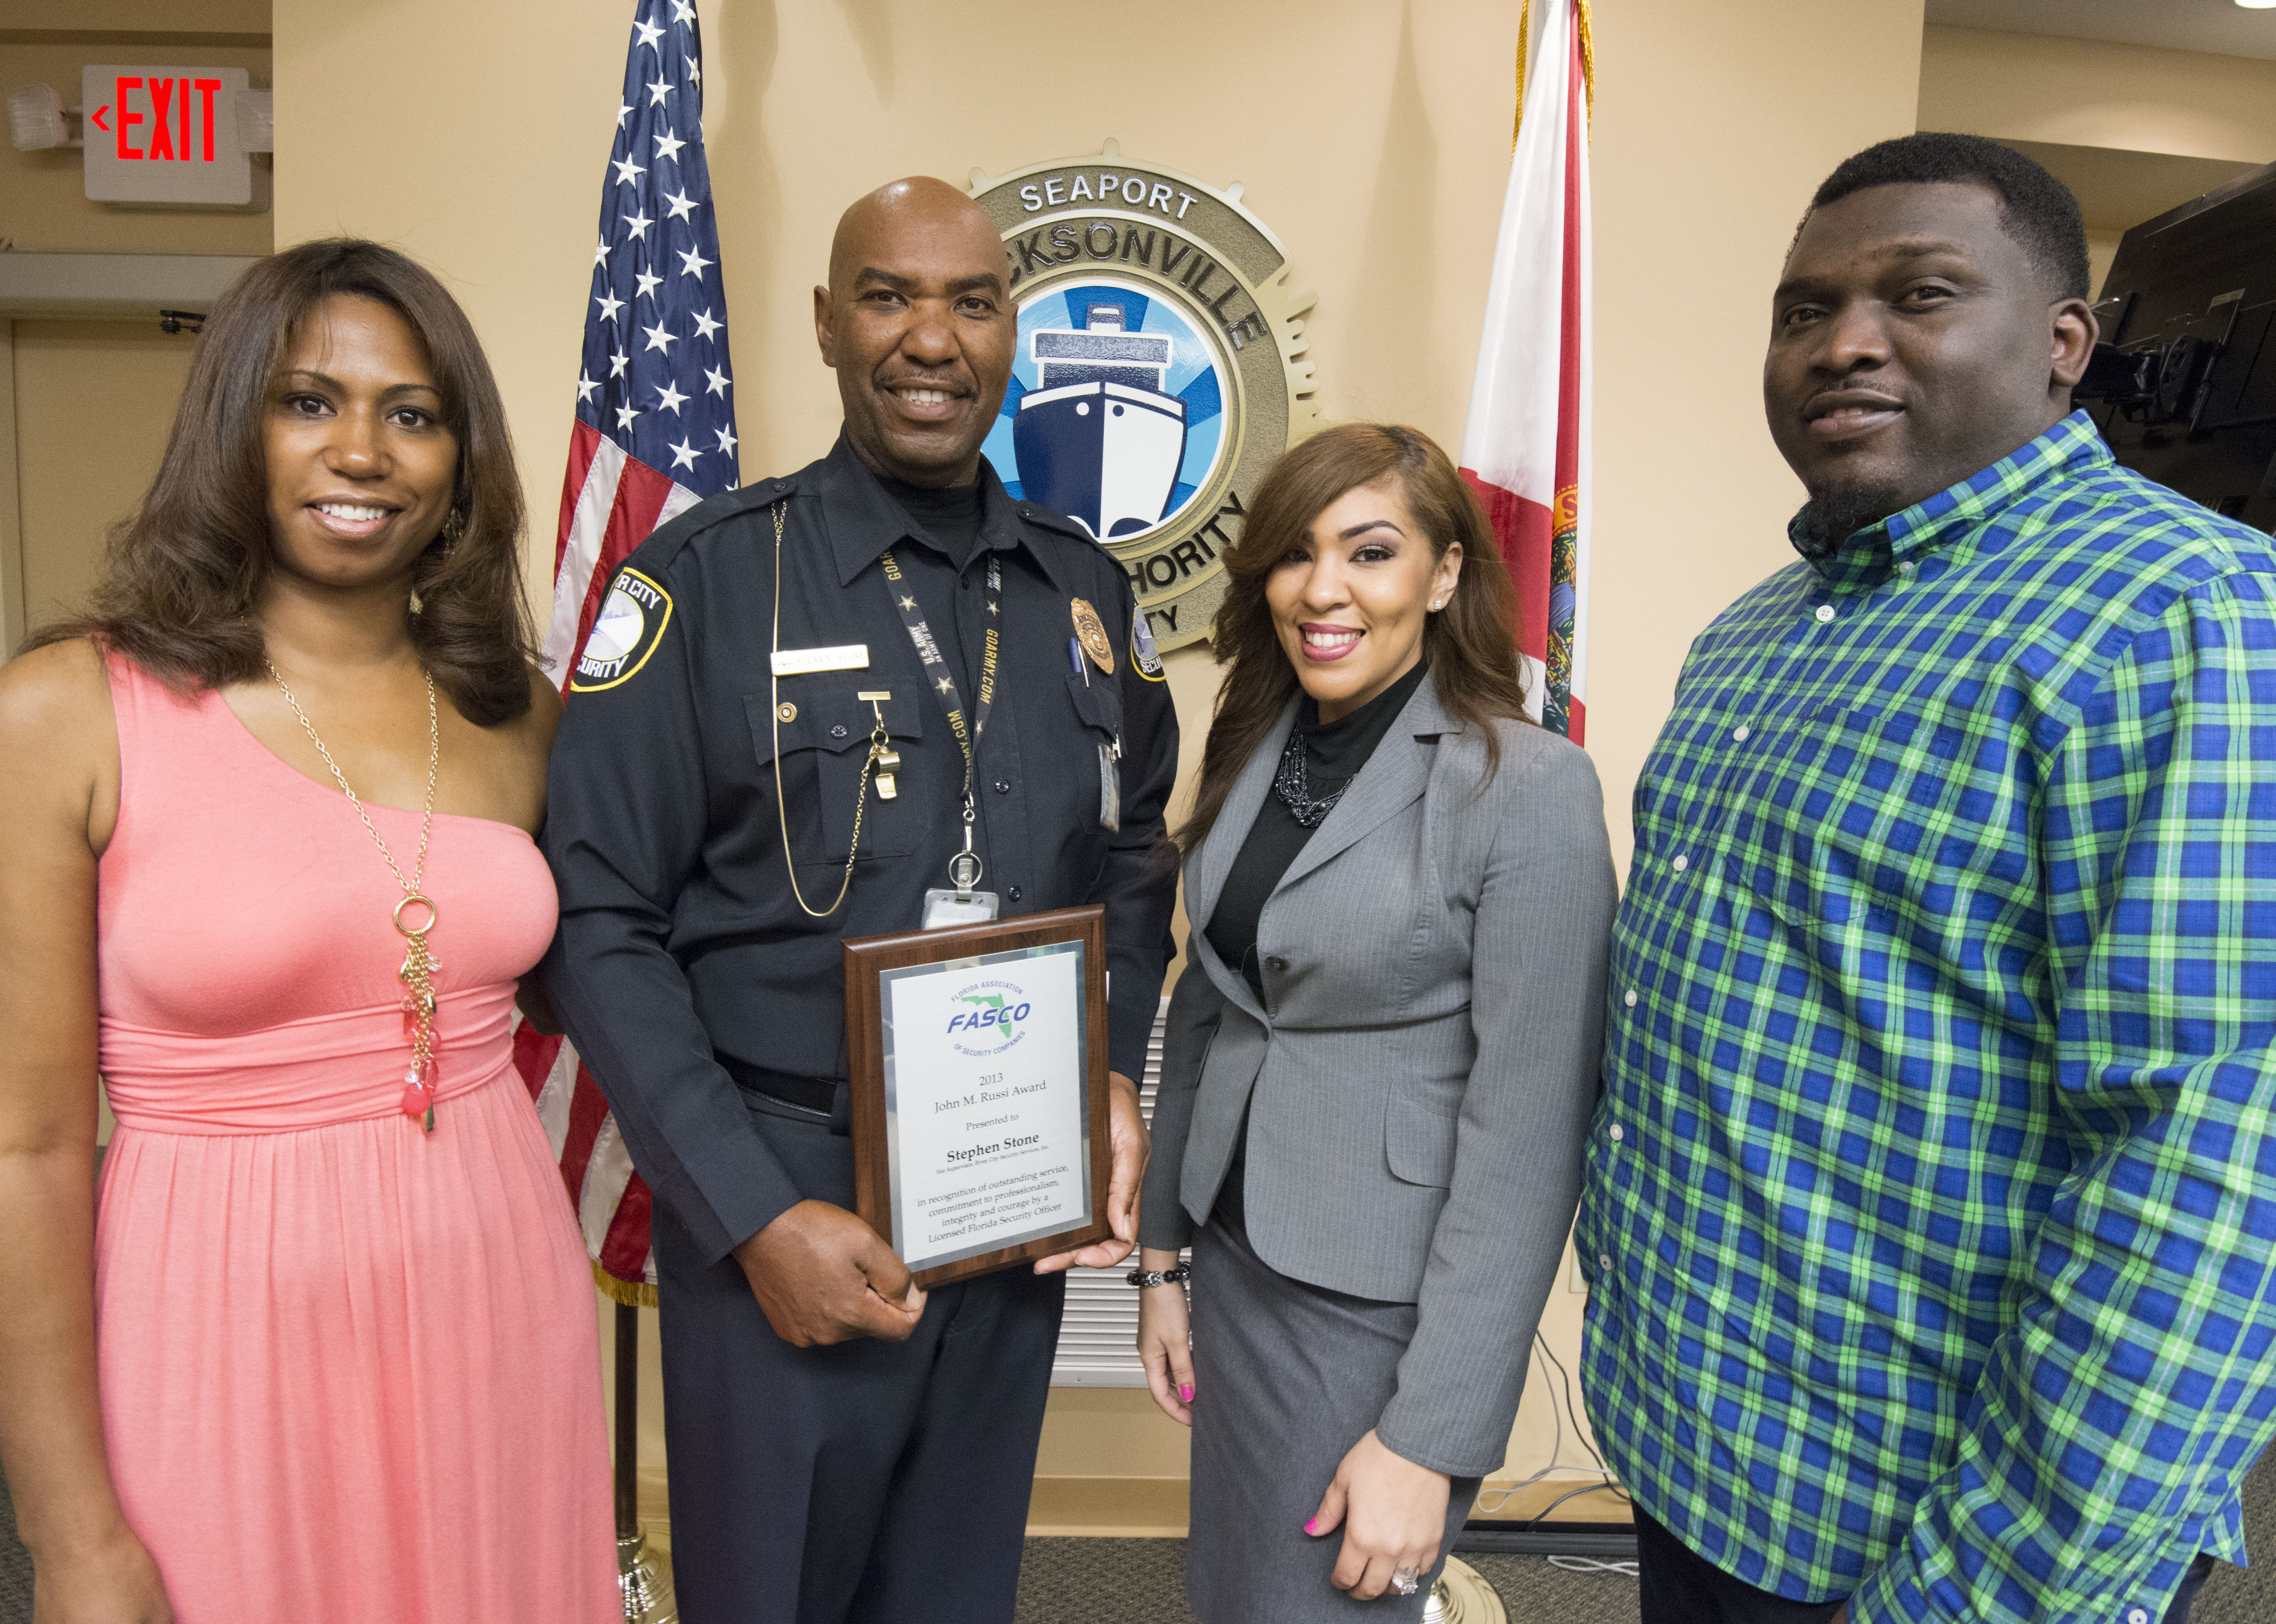 Cruise Terminal Security Officer Earns Statewide Honor